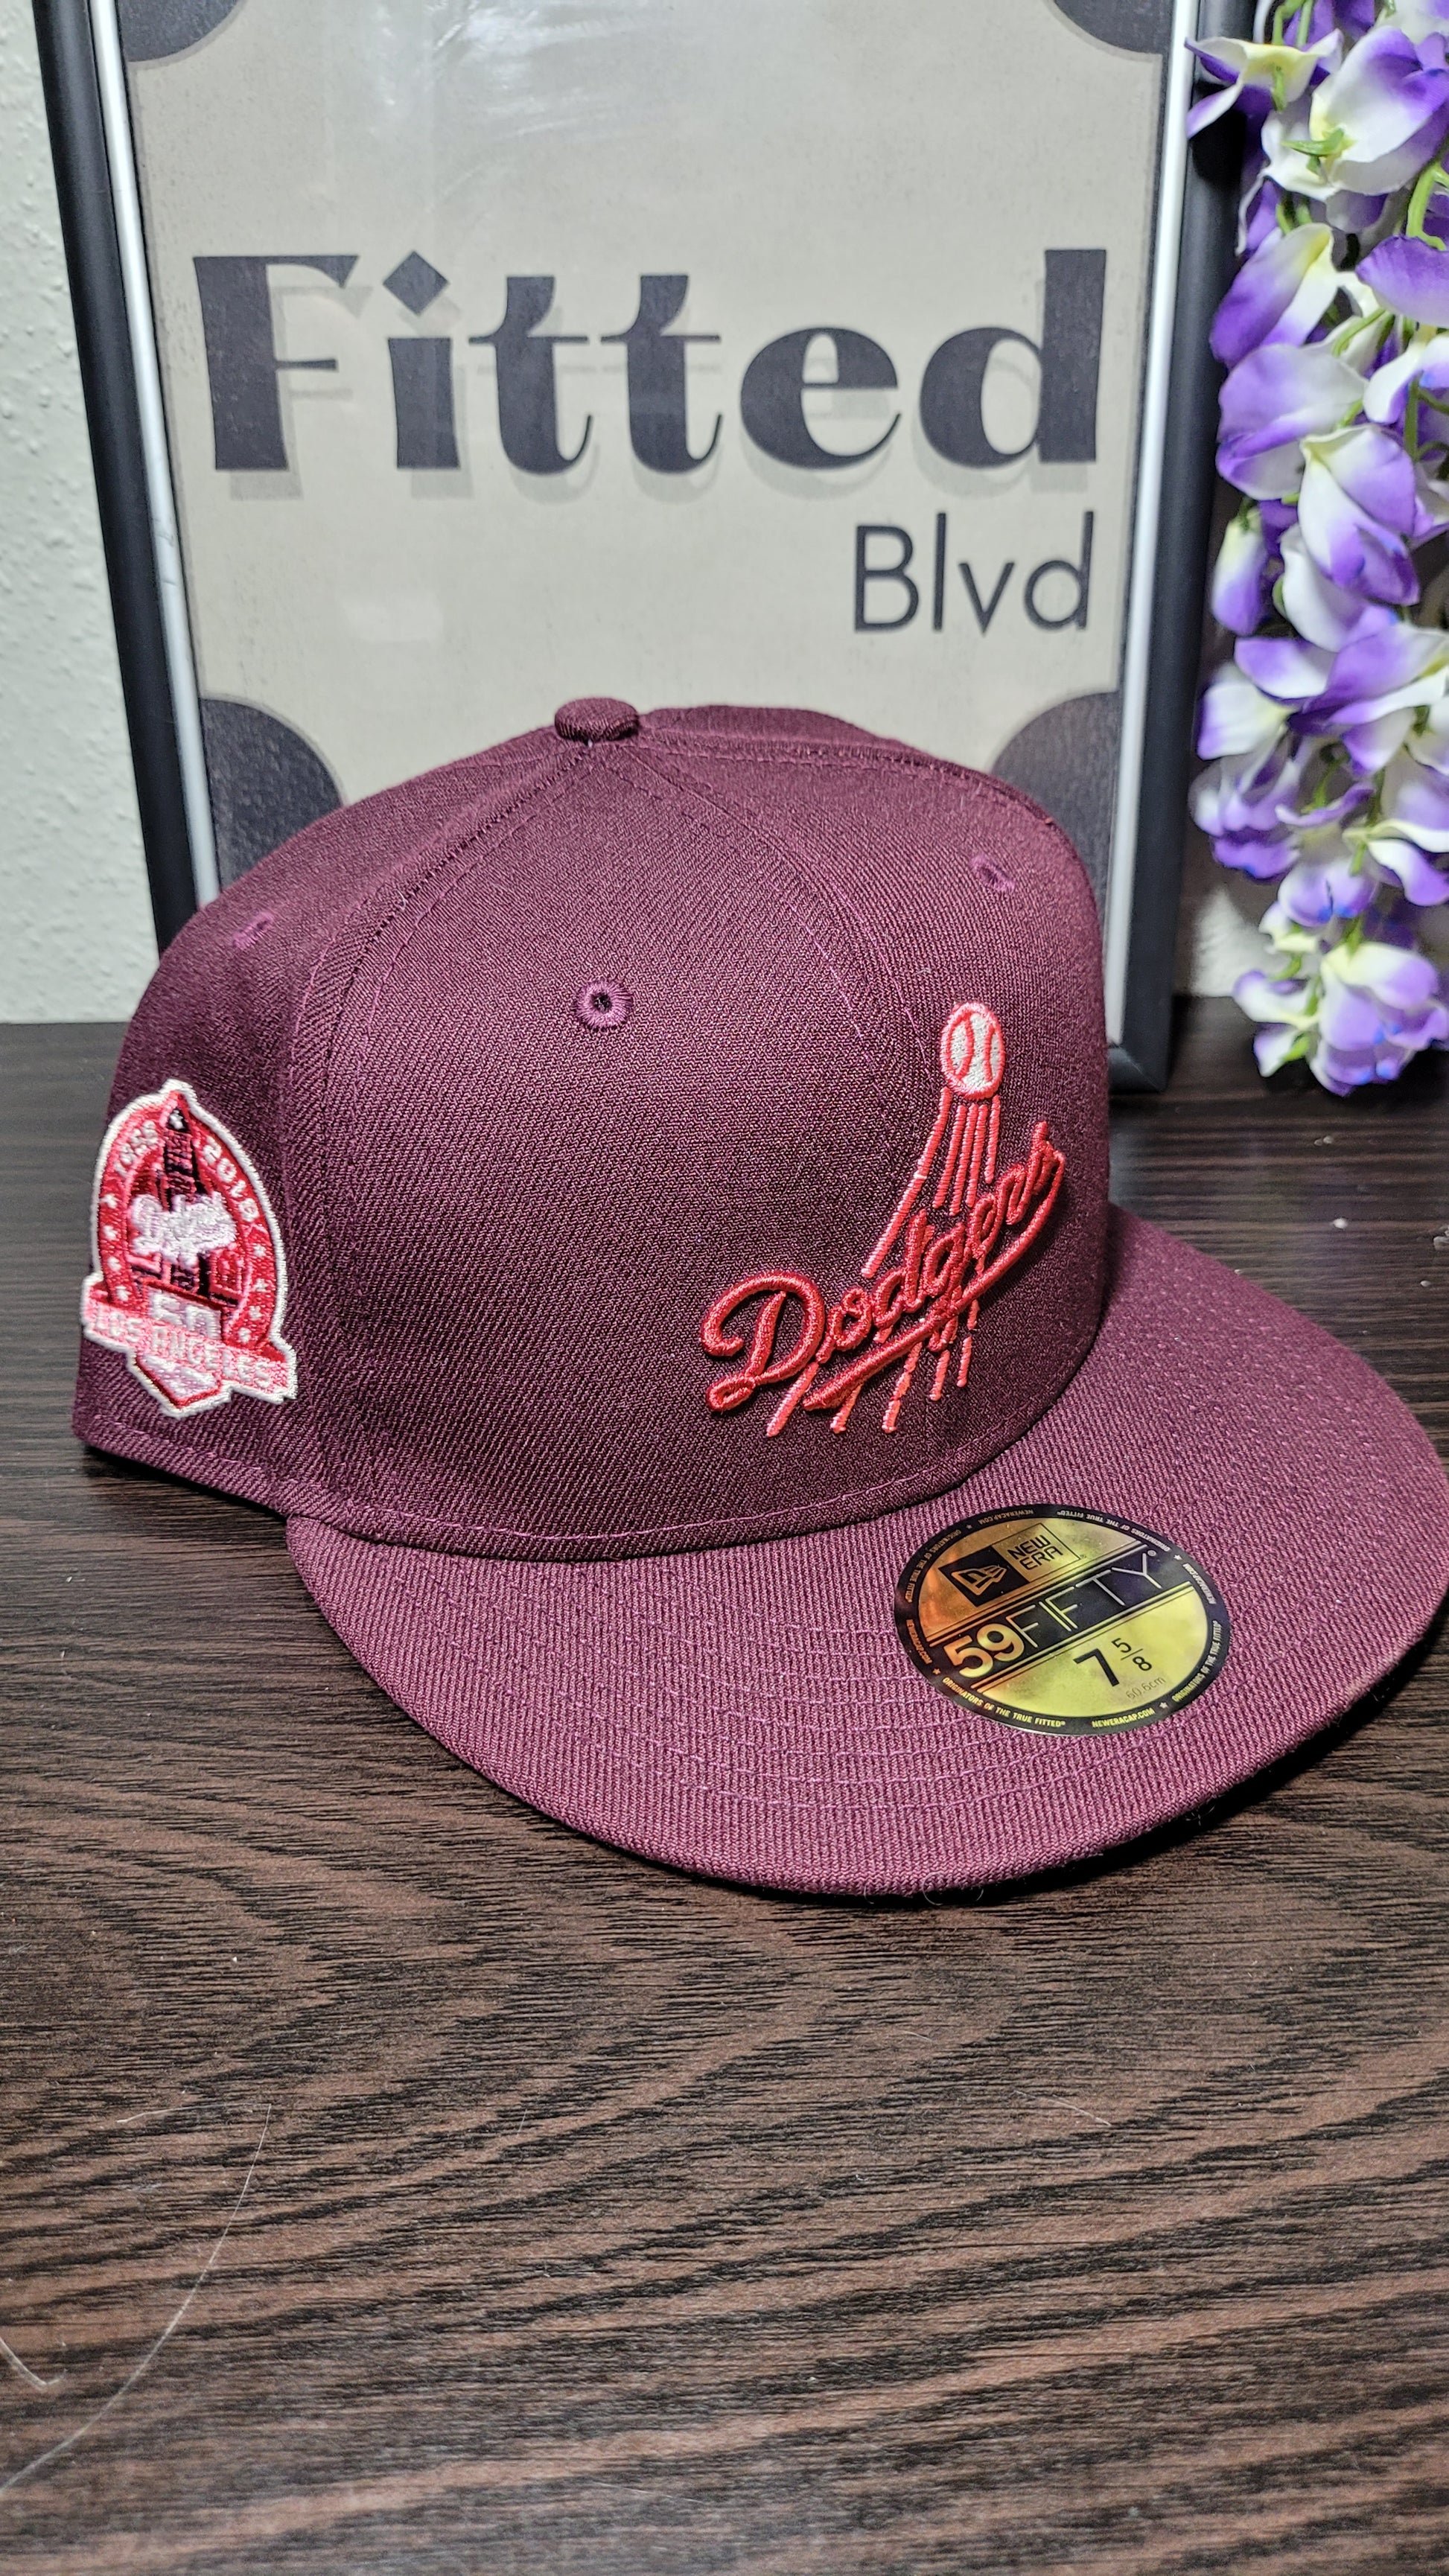 Our collaboration with NewEra and the Los Angeles Dodgers drops